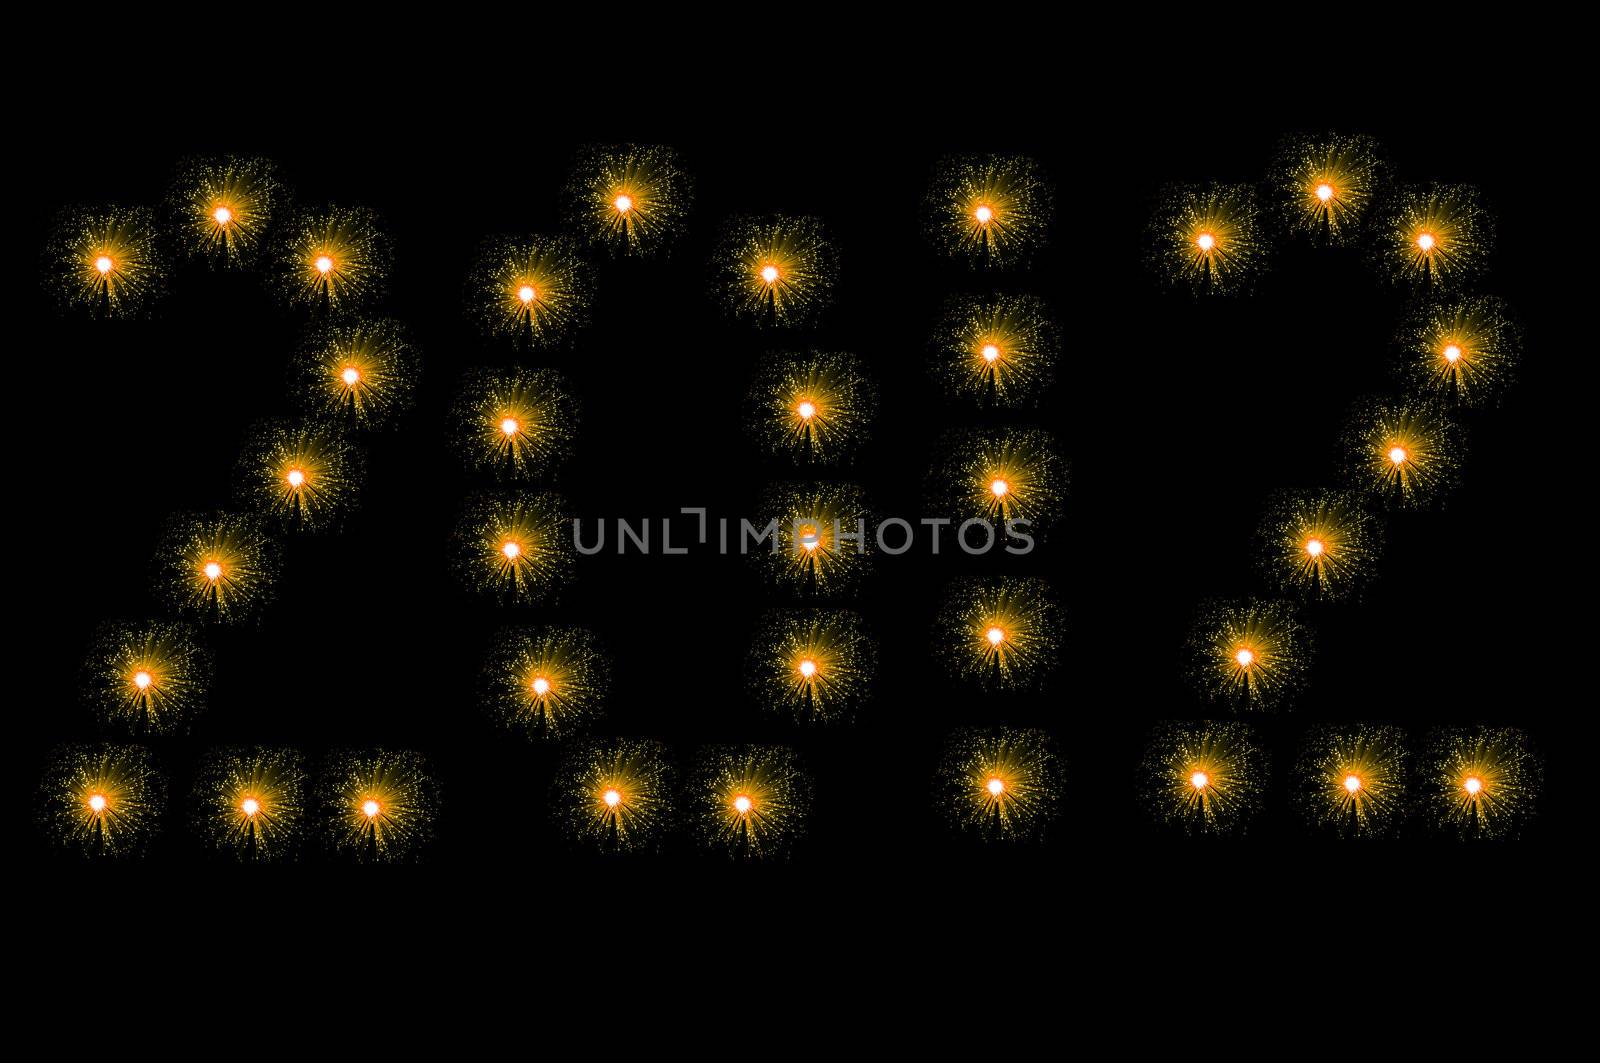 Many small illuminated yellow fibre optic lamps arranged on black background to spell the number 2012